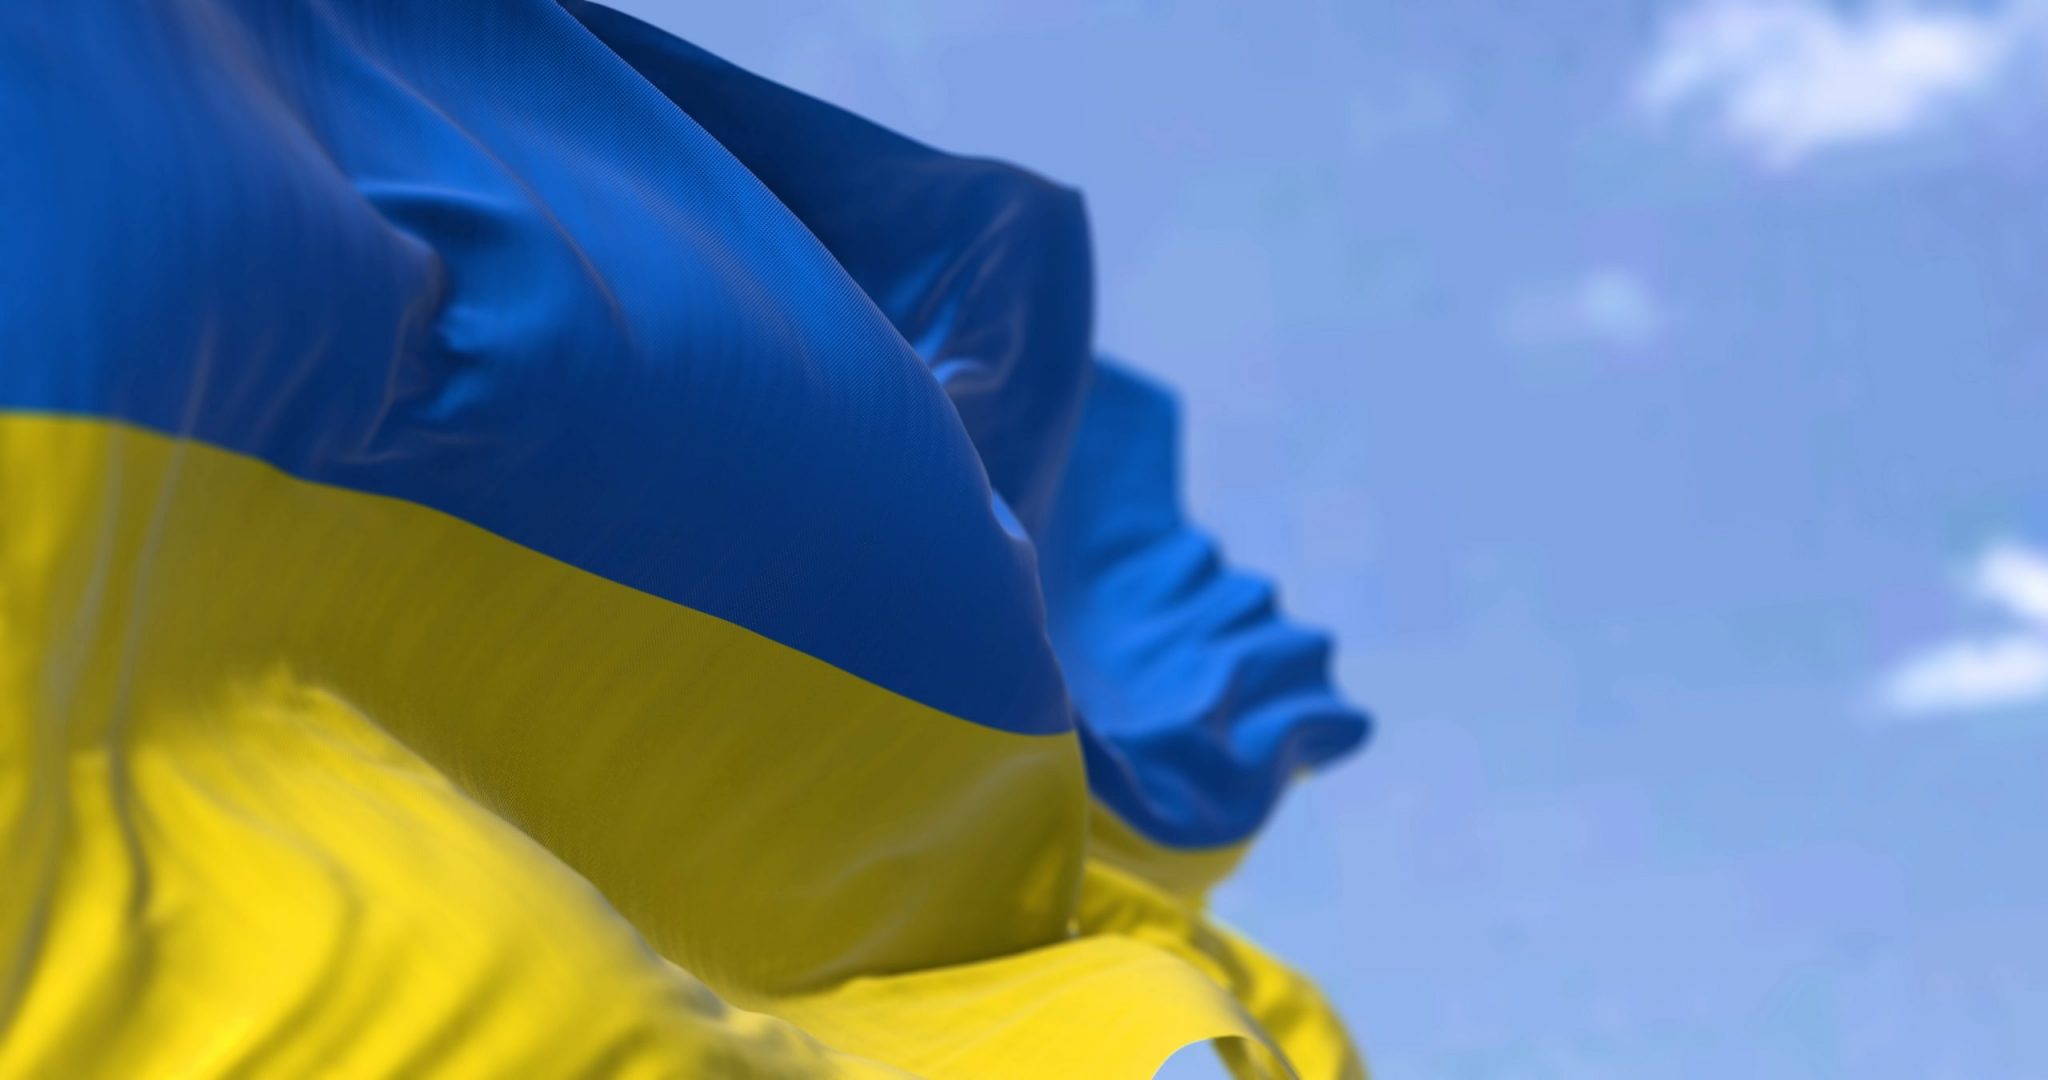 Detail of the national flag of Ukraine waving in the wind on a clear day.